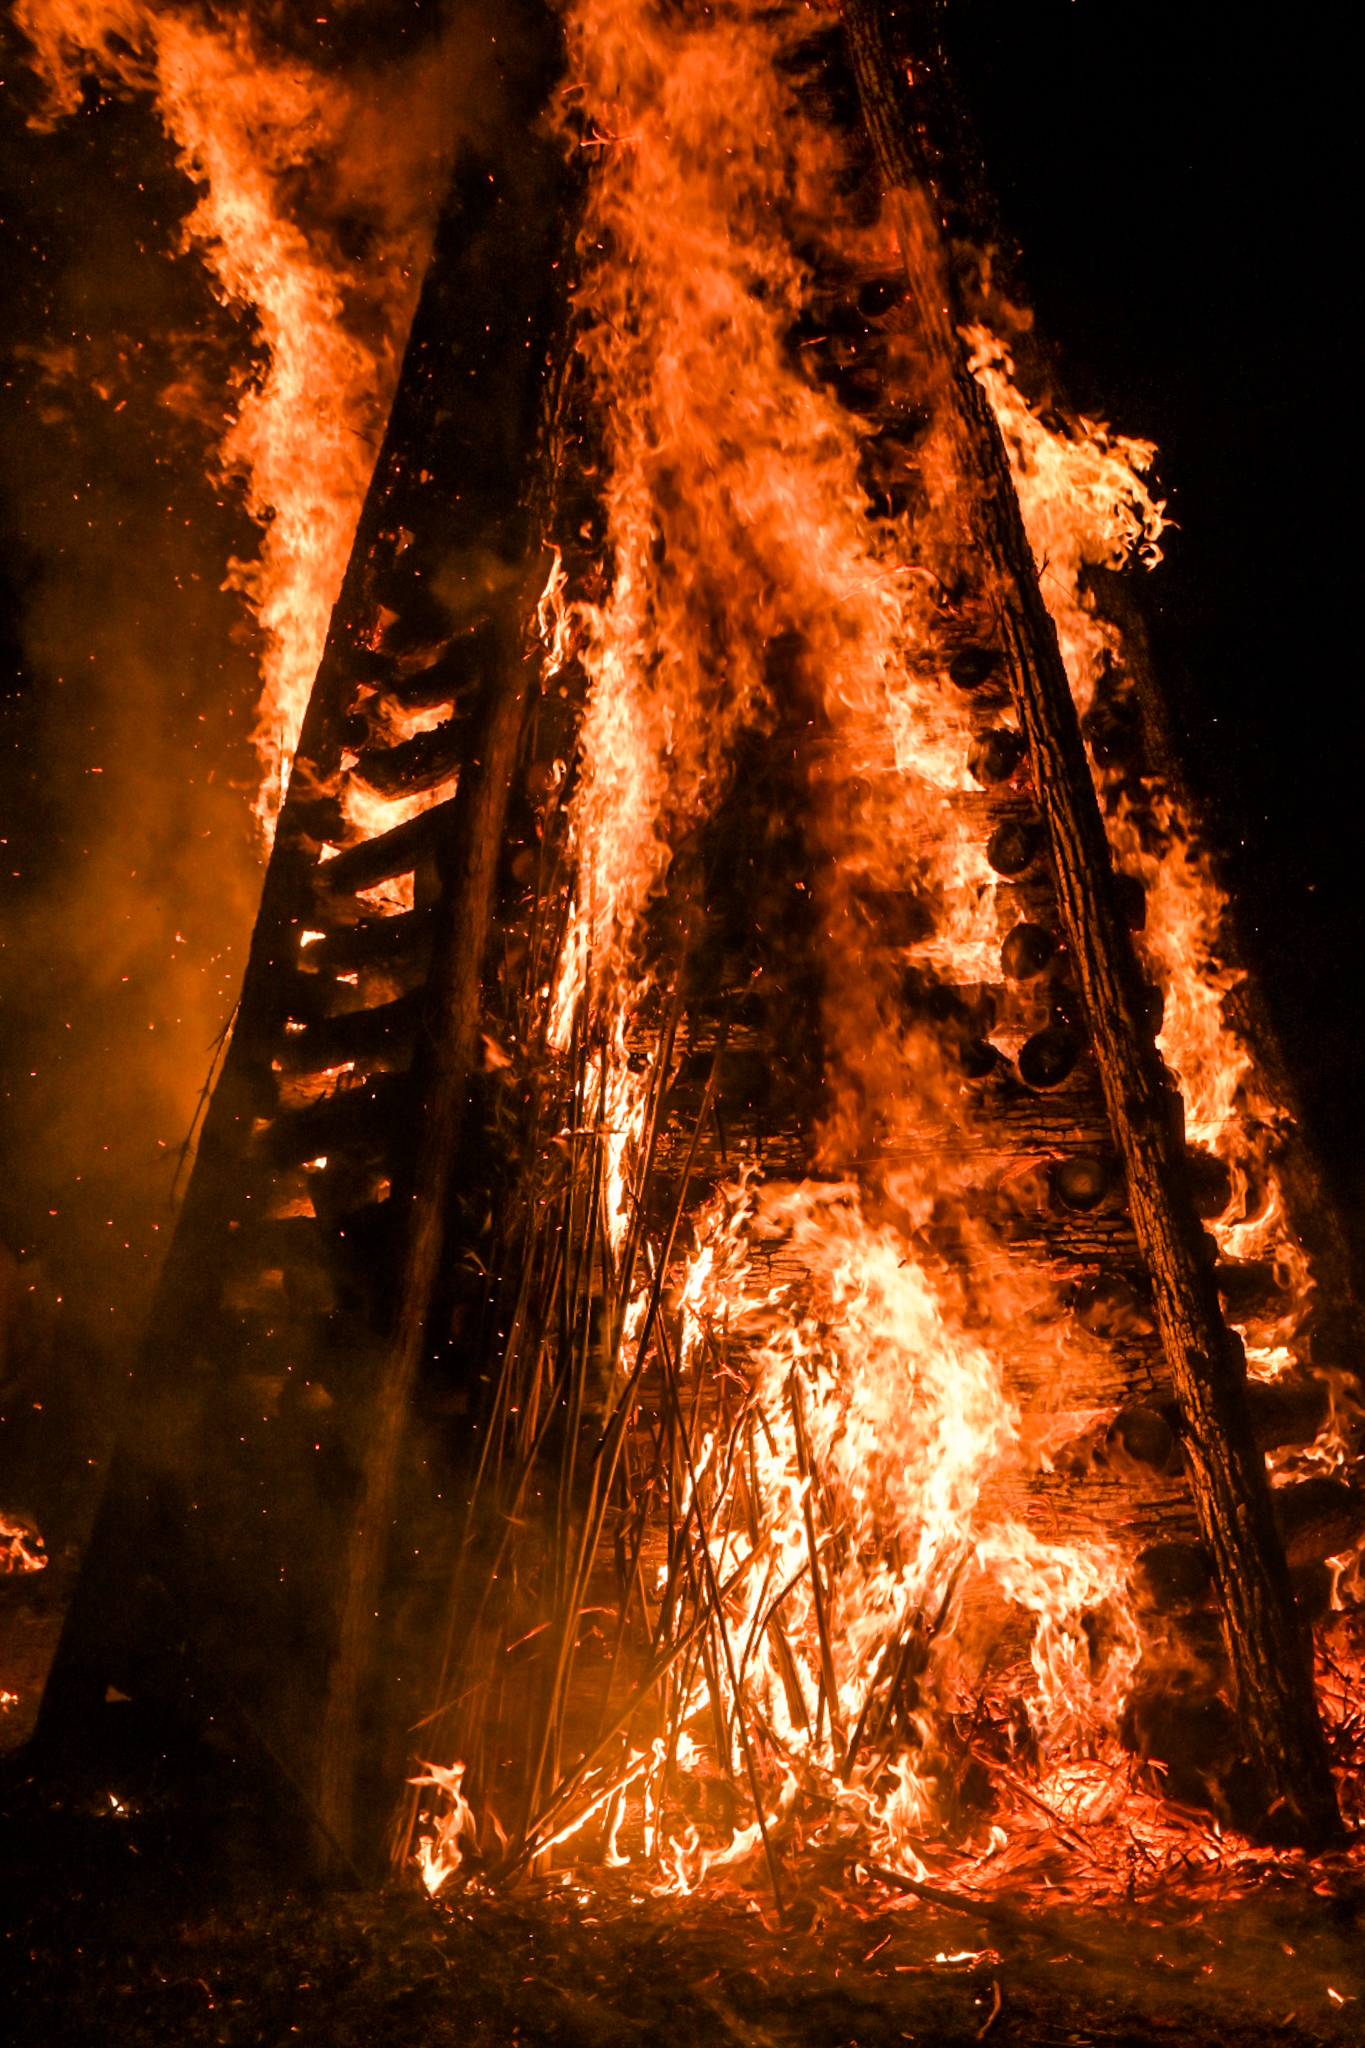 A 15-foot tower burns as part of a Christmas Eve tradition